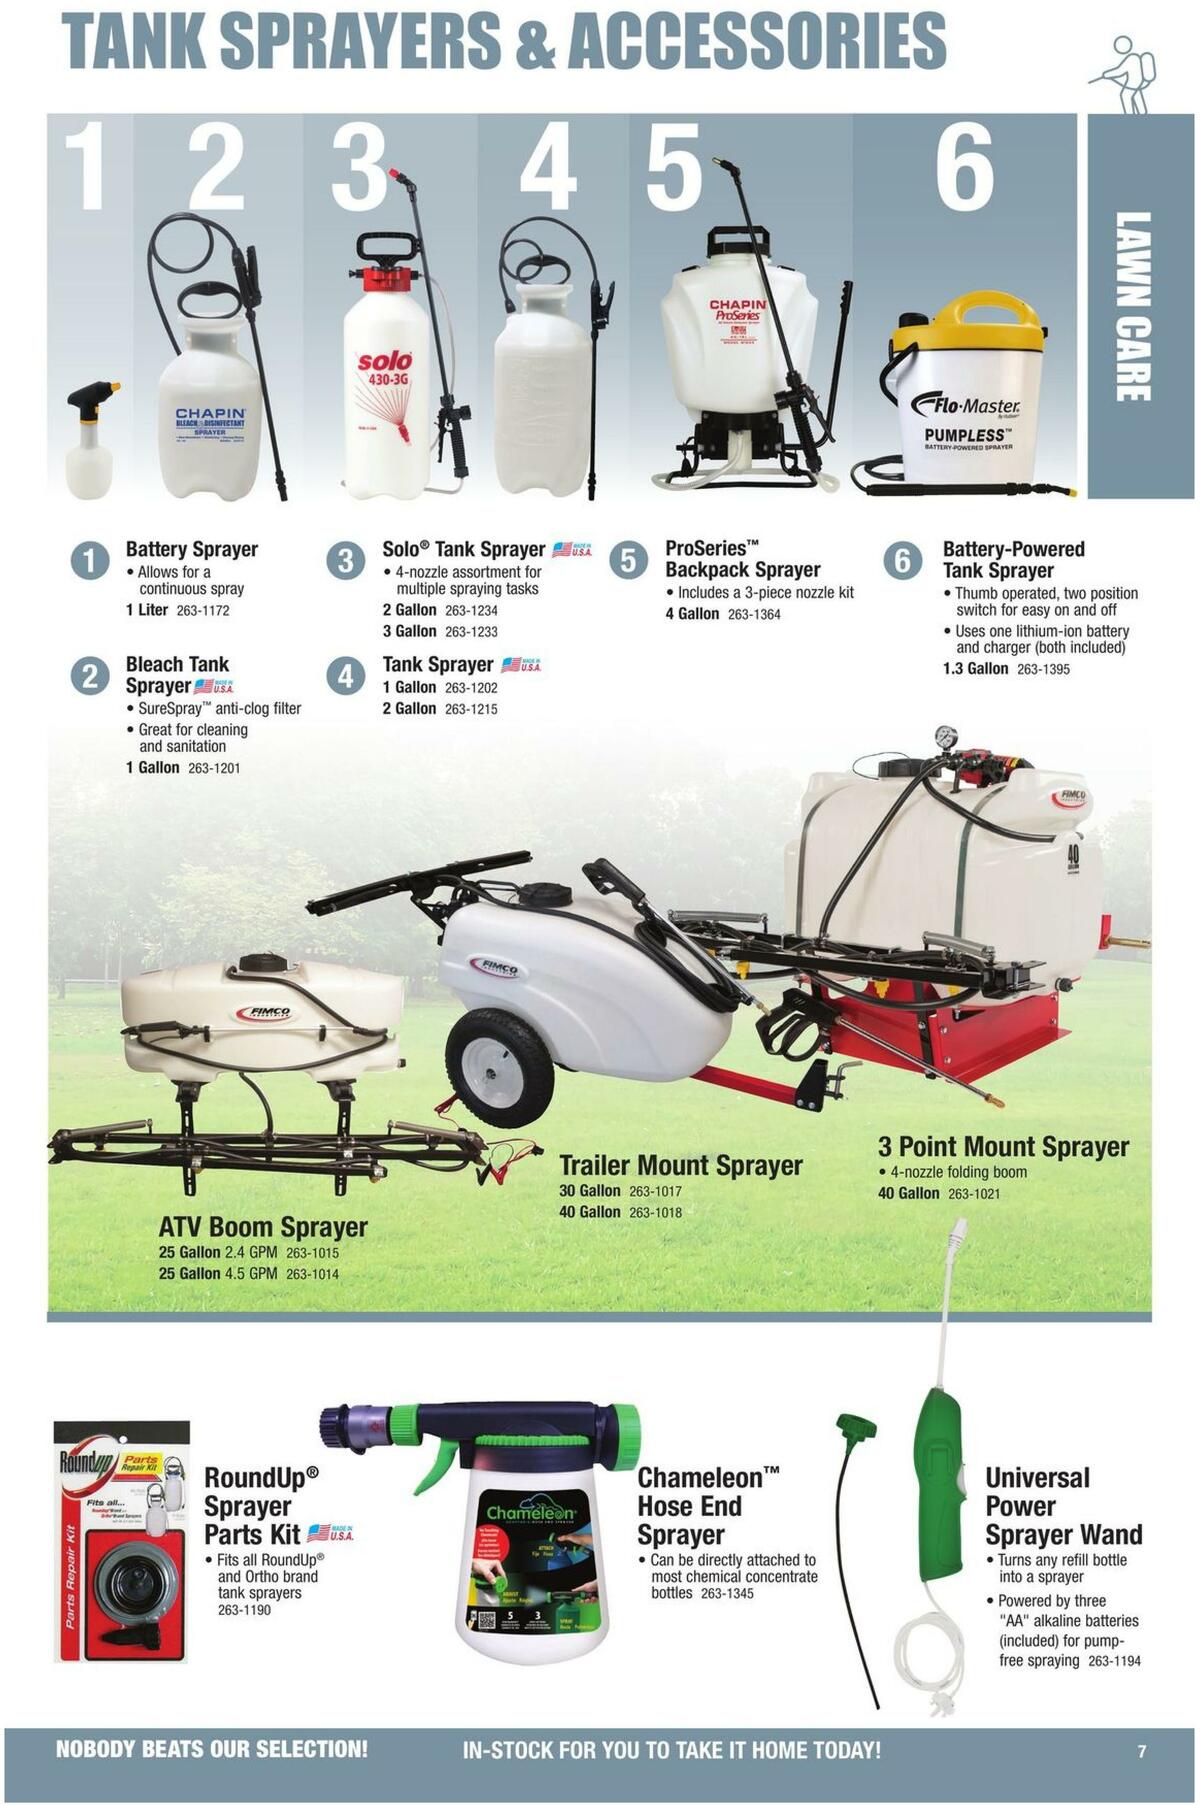 Menards Lawn & Garden Catalog Weekly Ad from March 22